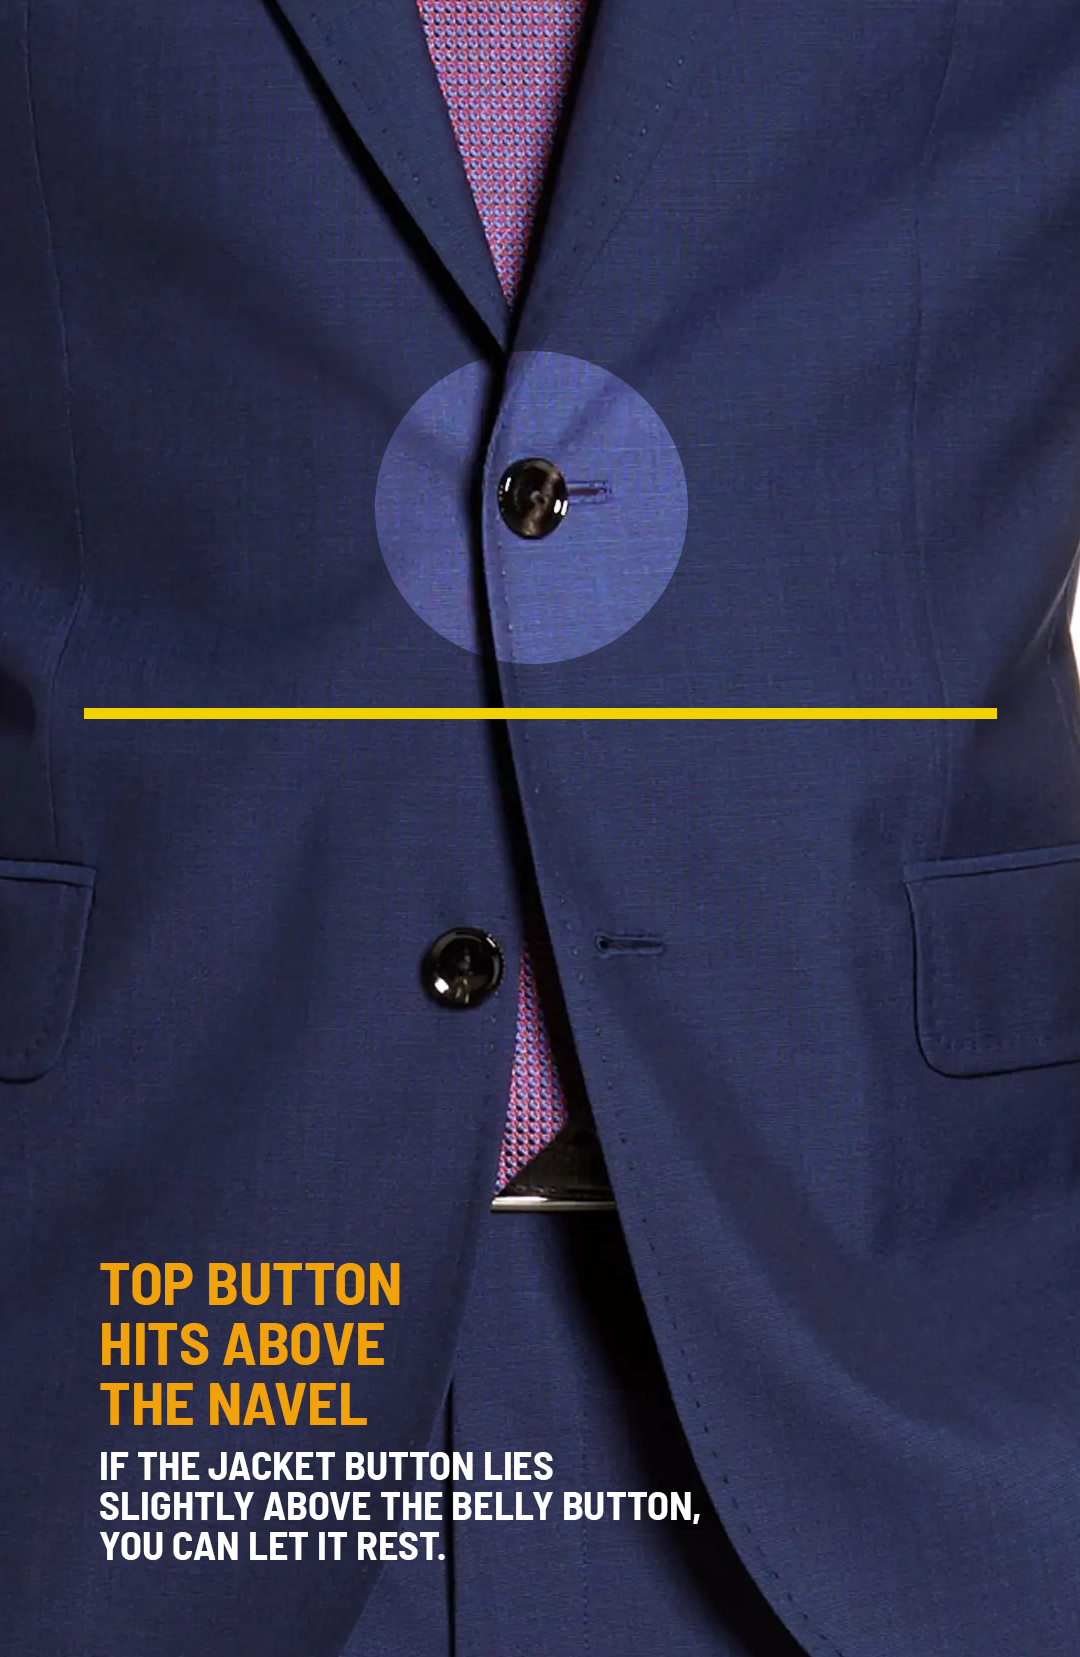 The top button hits above the navel on a two-button suit jacket